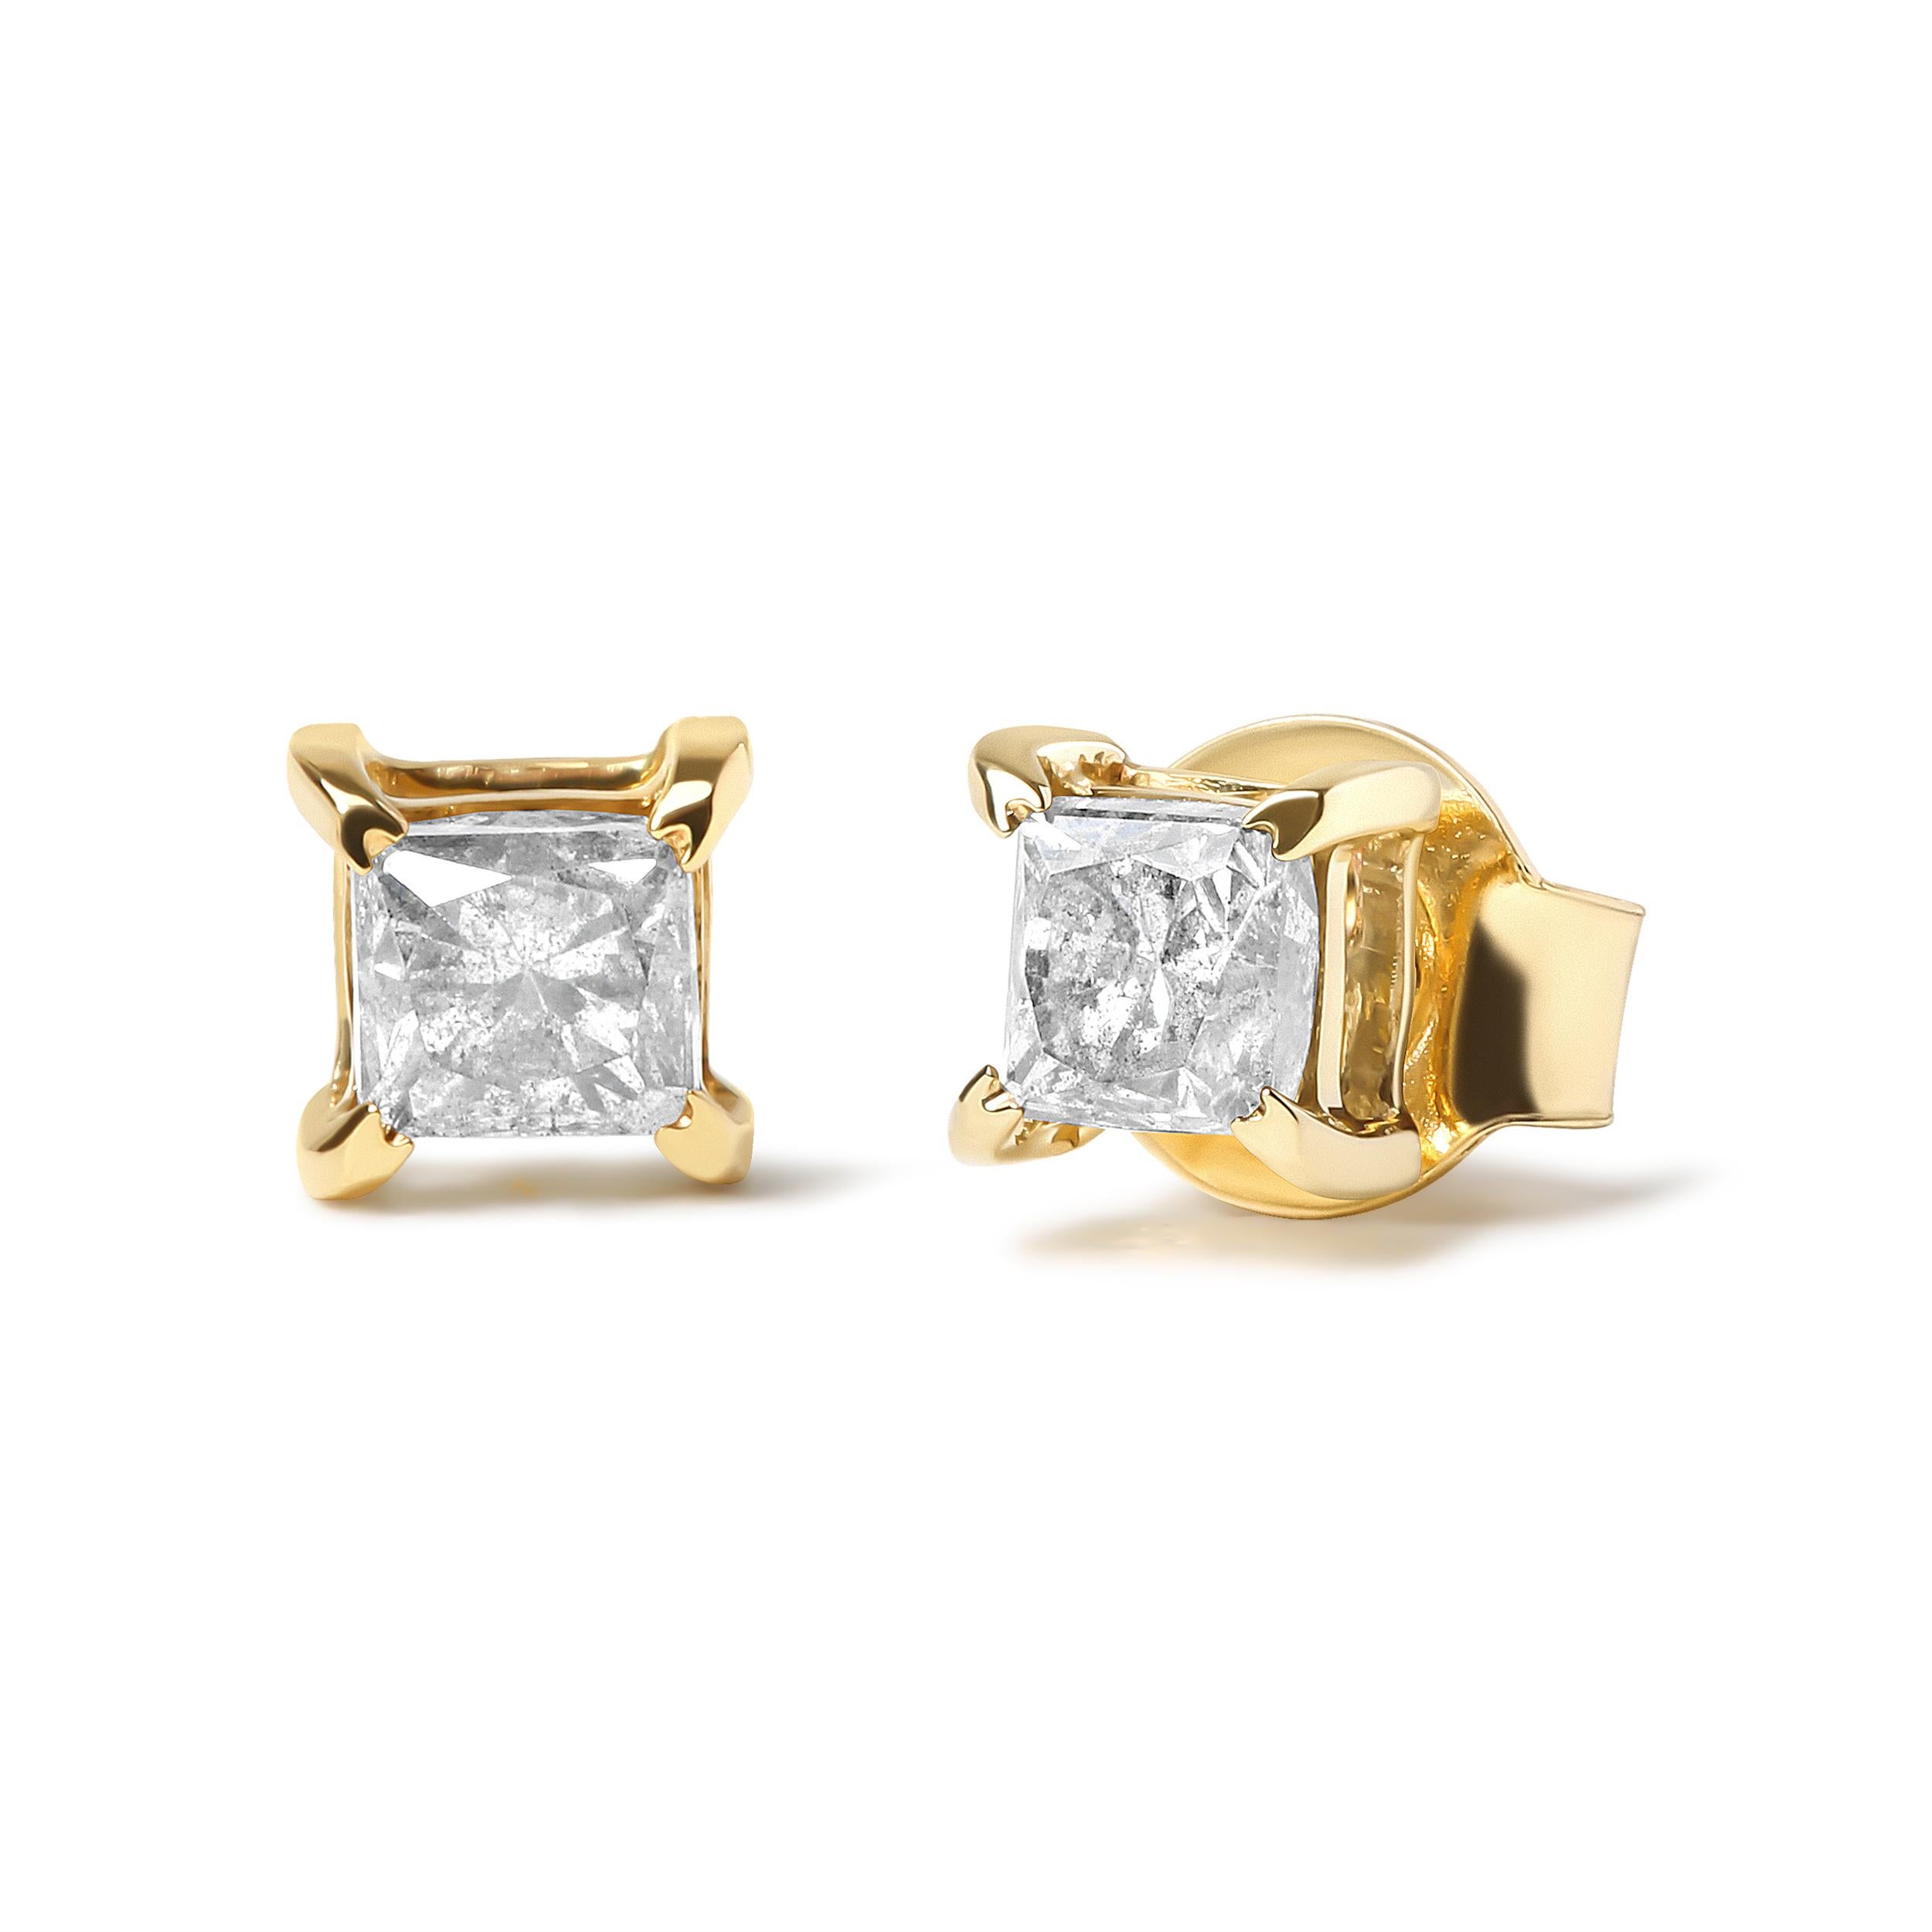 Introducing a captivating pair of 10K Yellow Gold Solitaire Stud Earrings, adorned with 5/8 cttw Princess Cut Diamonds. Crafted with love and expertise, these earrings are a testament to timeless elegance. The natural diamonds, with their enchanting